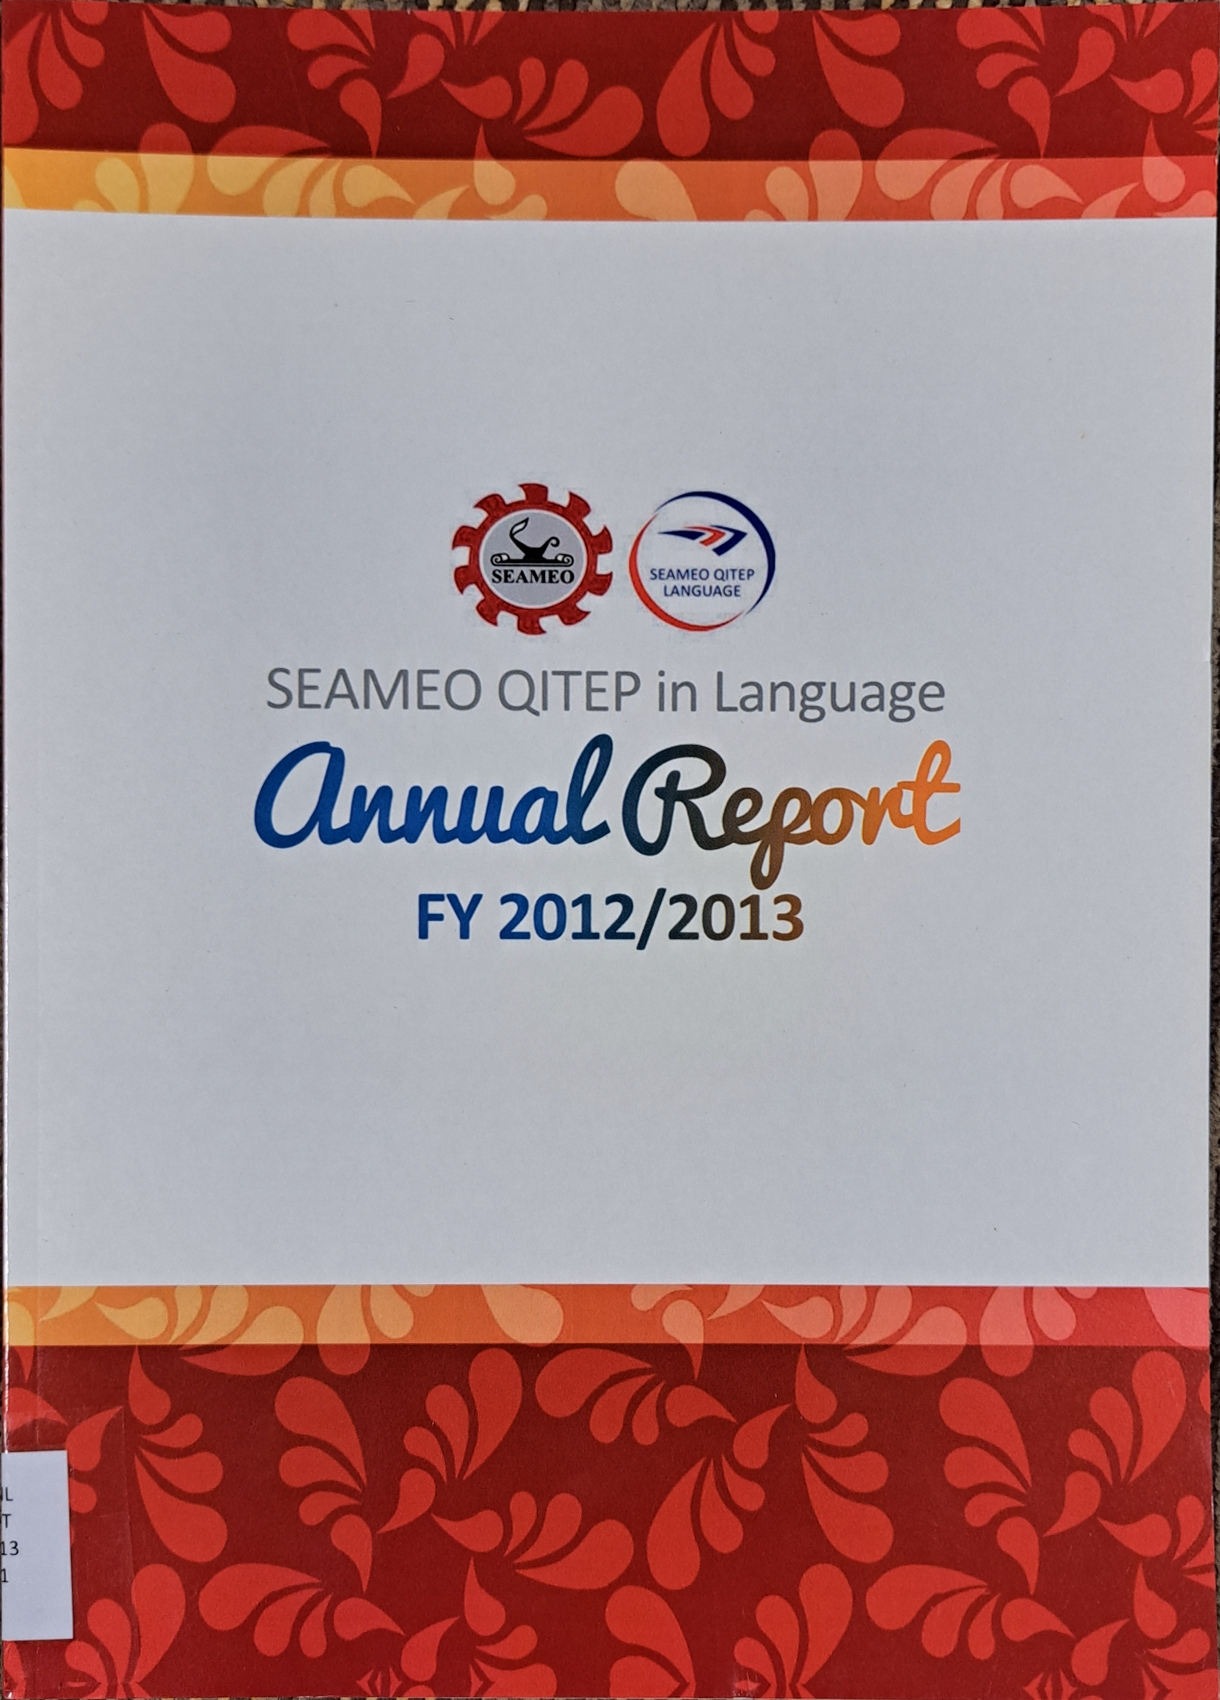 Cover image for Annual report fy 2012 - 2013 (SEAMEO QITEP LANGUAGE) bibliographic